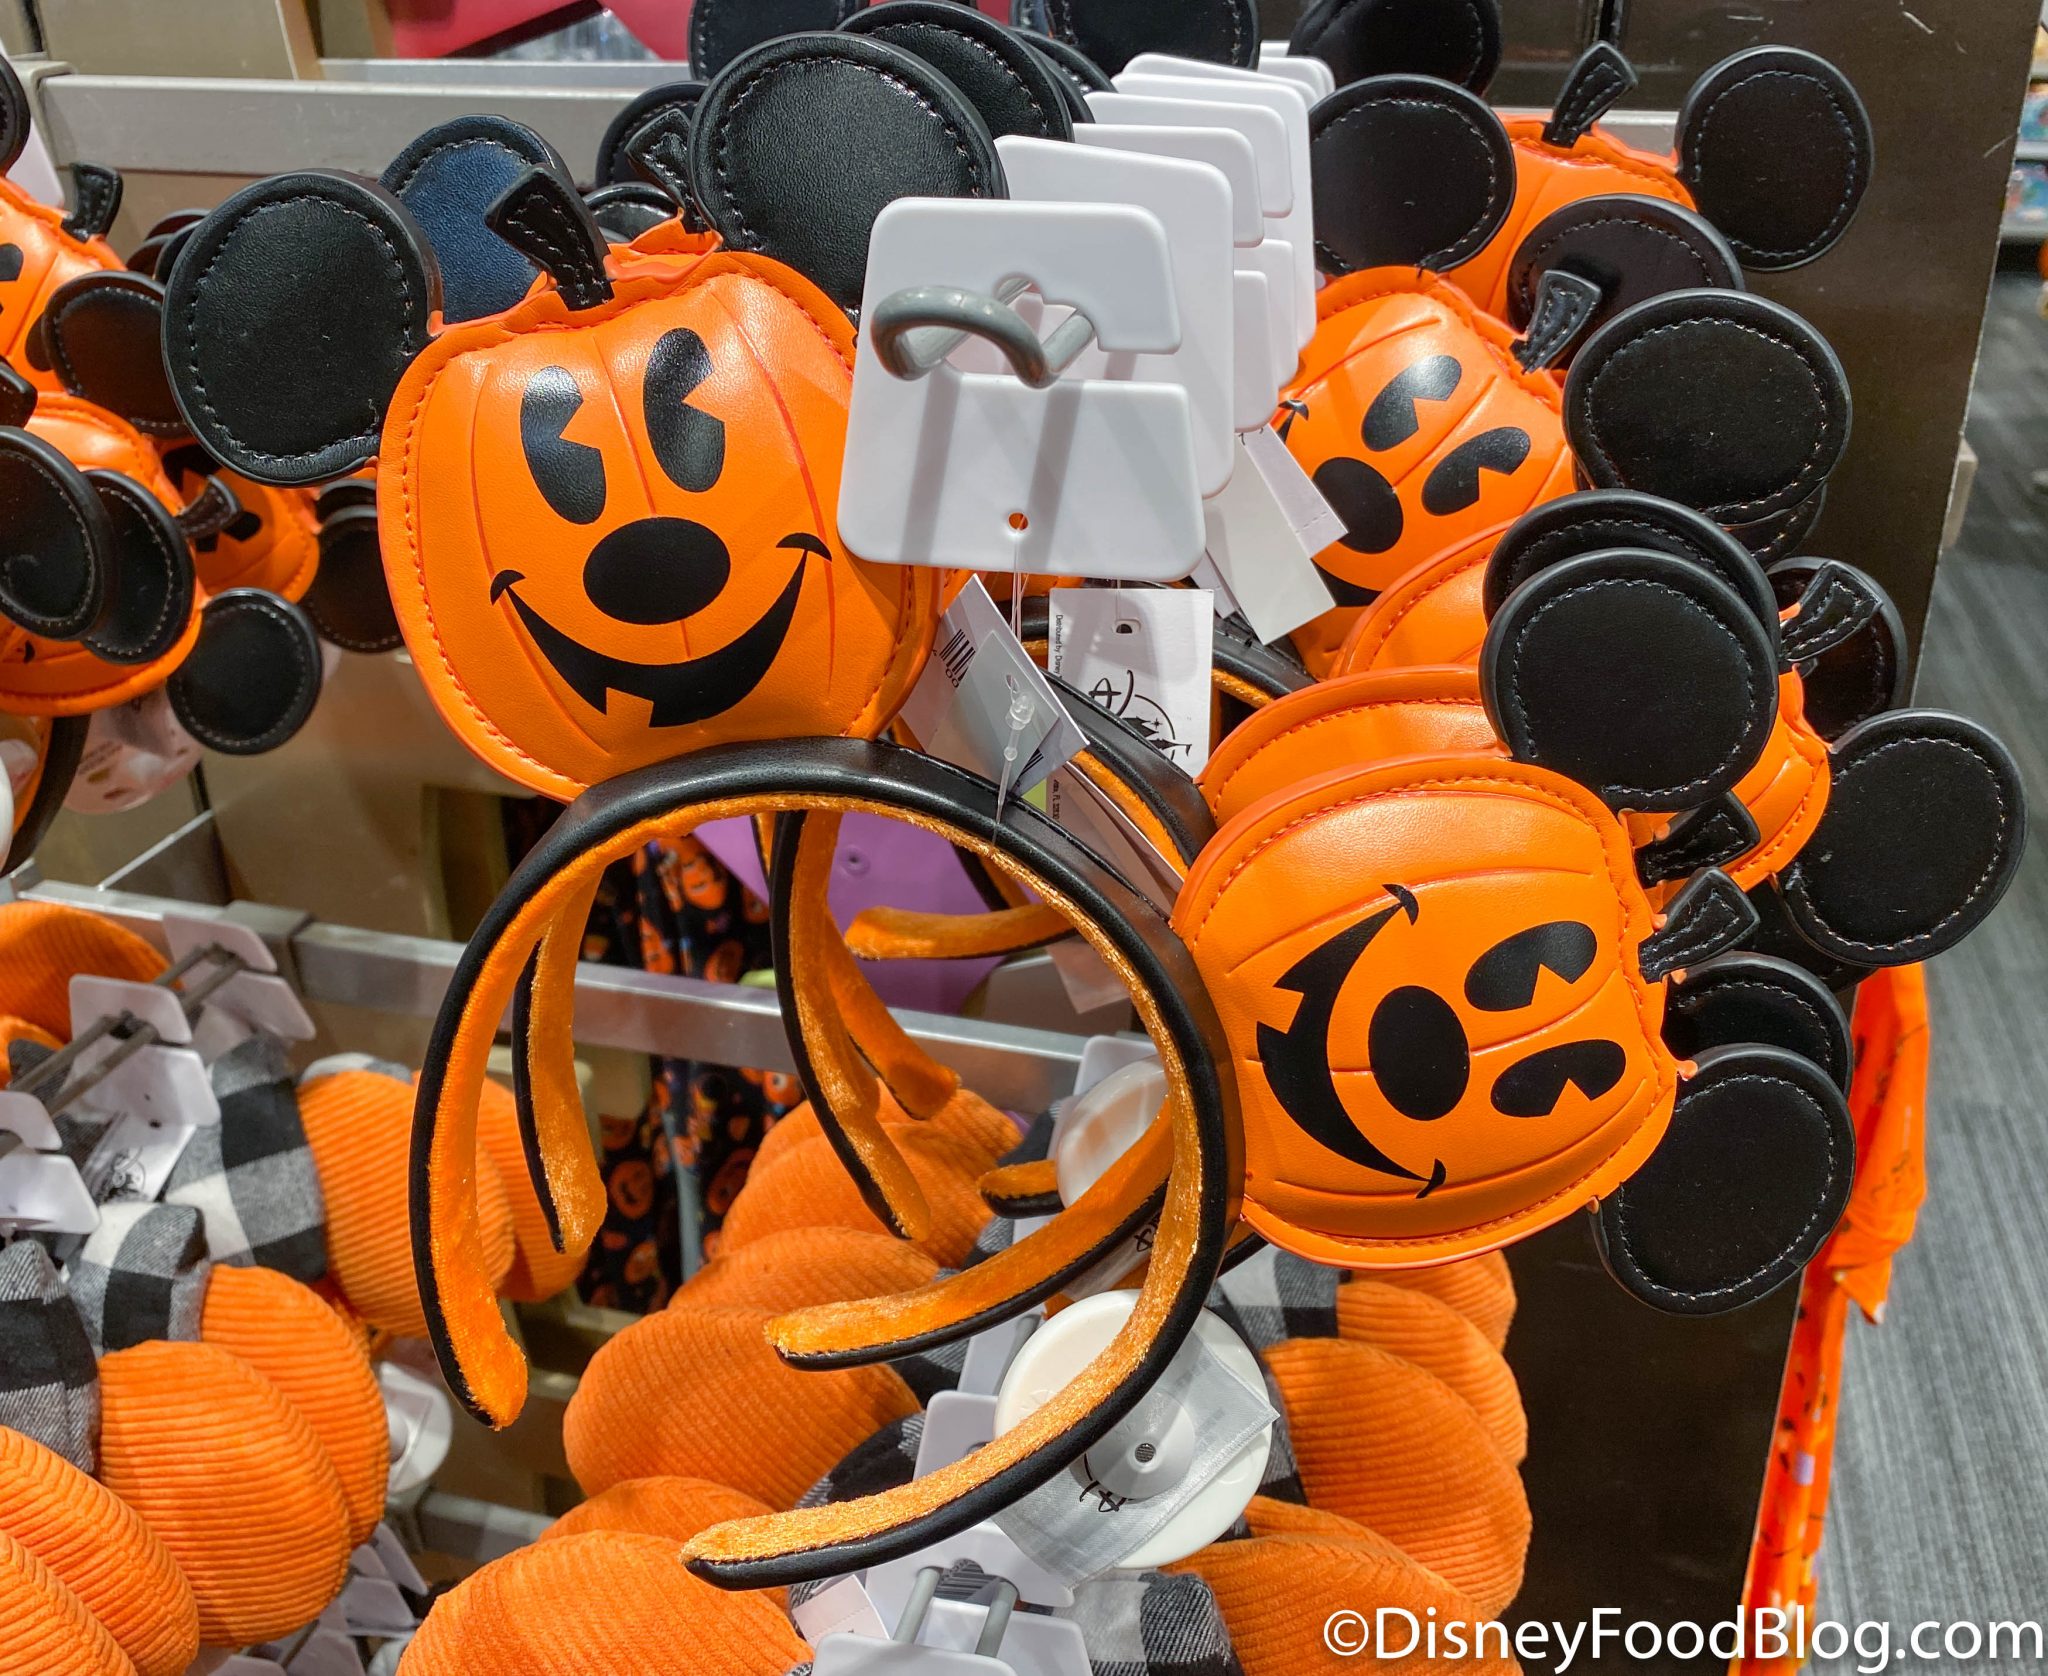 You Can Get 2 Disney Halloween Tote Bags For Less Than the Price of 1